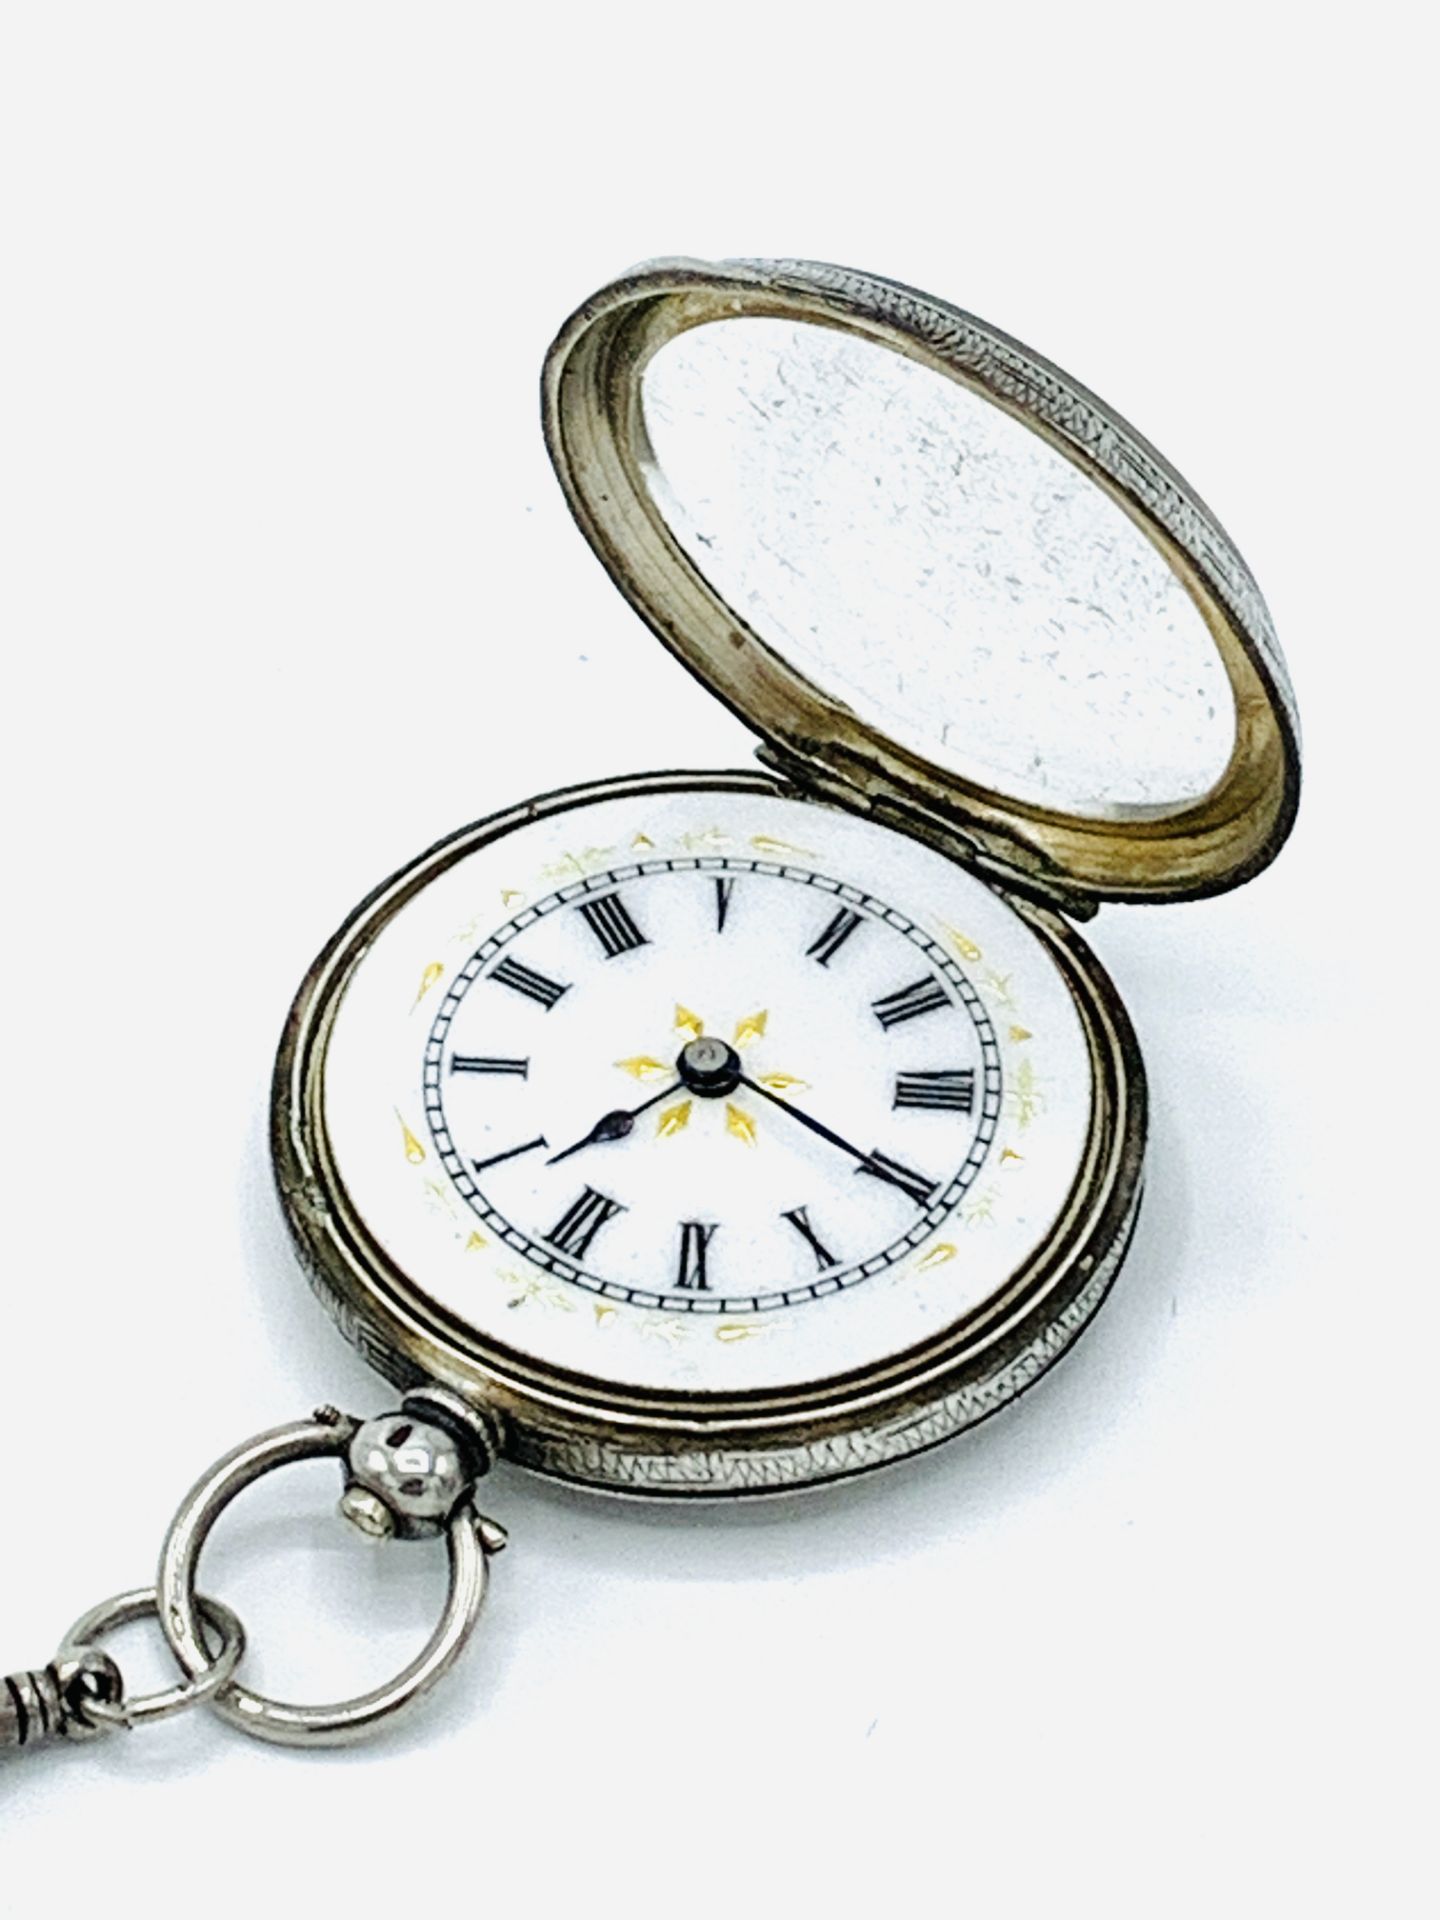 935 silver cased small pocket watch - Image 2 of 4